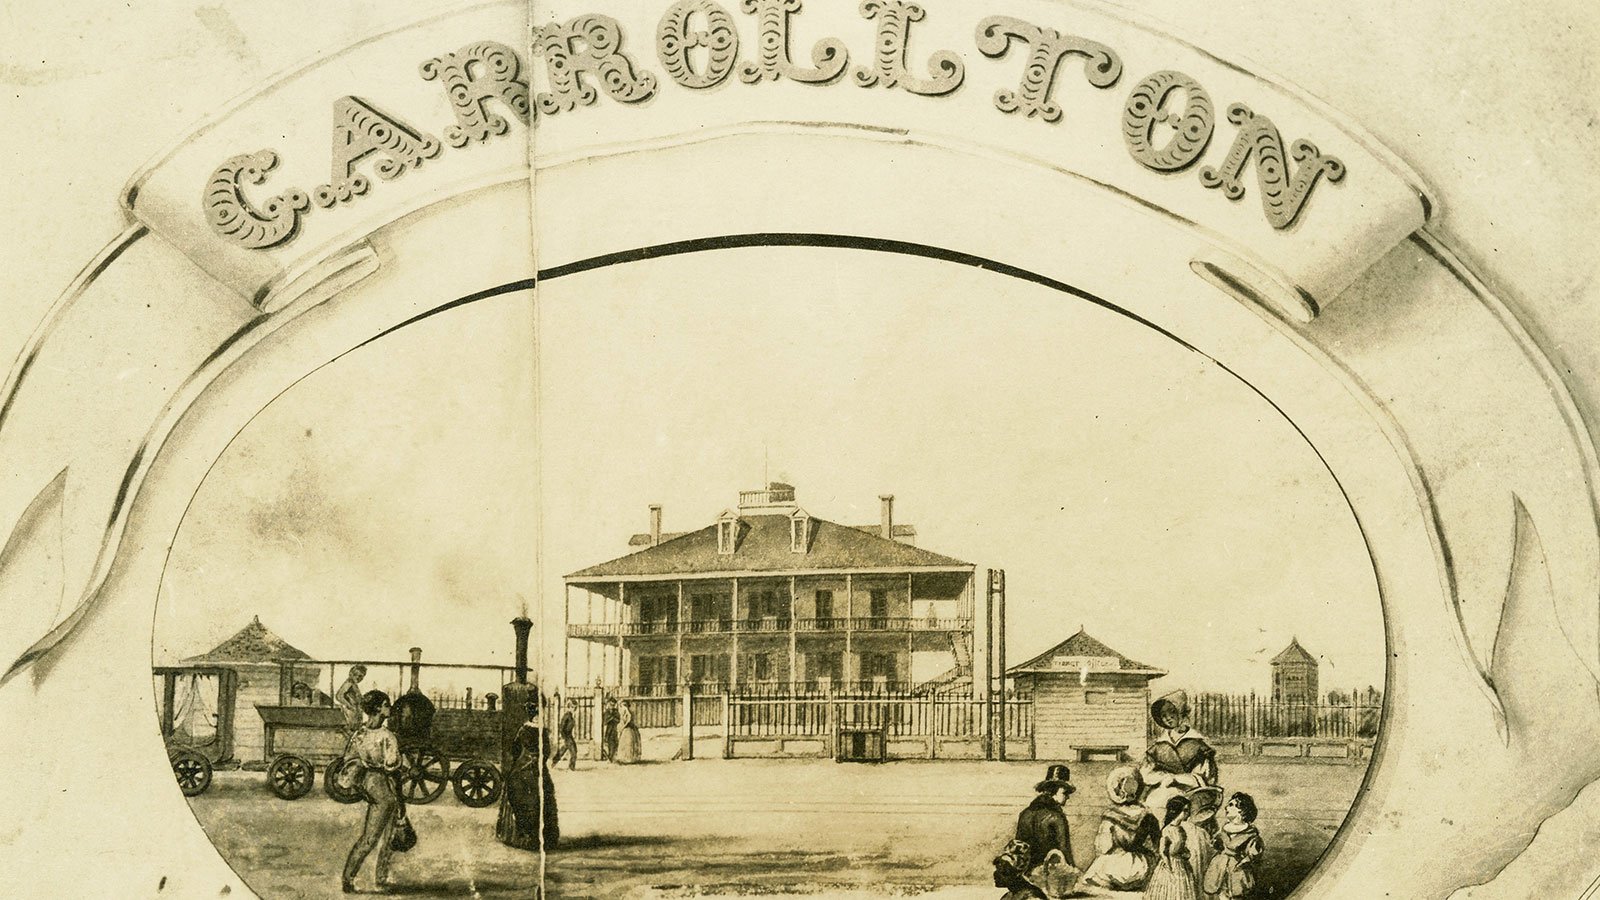 drawing of the Carrolton Hotel